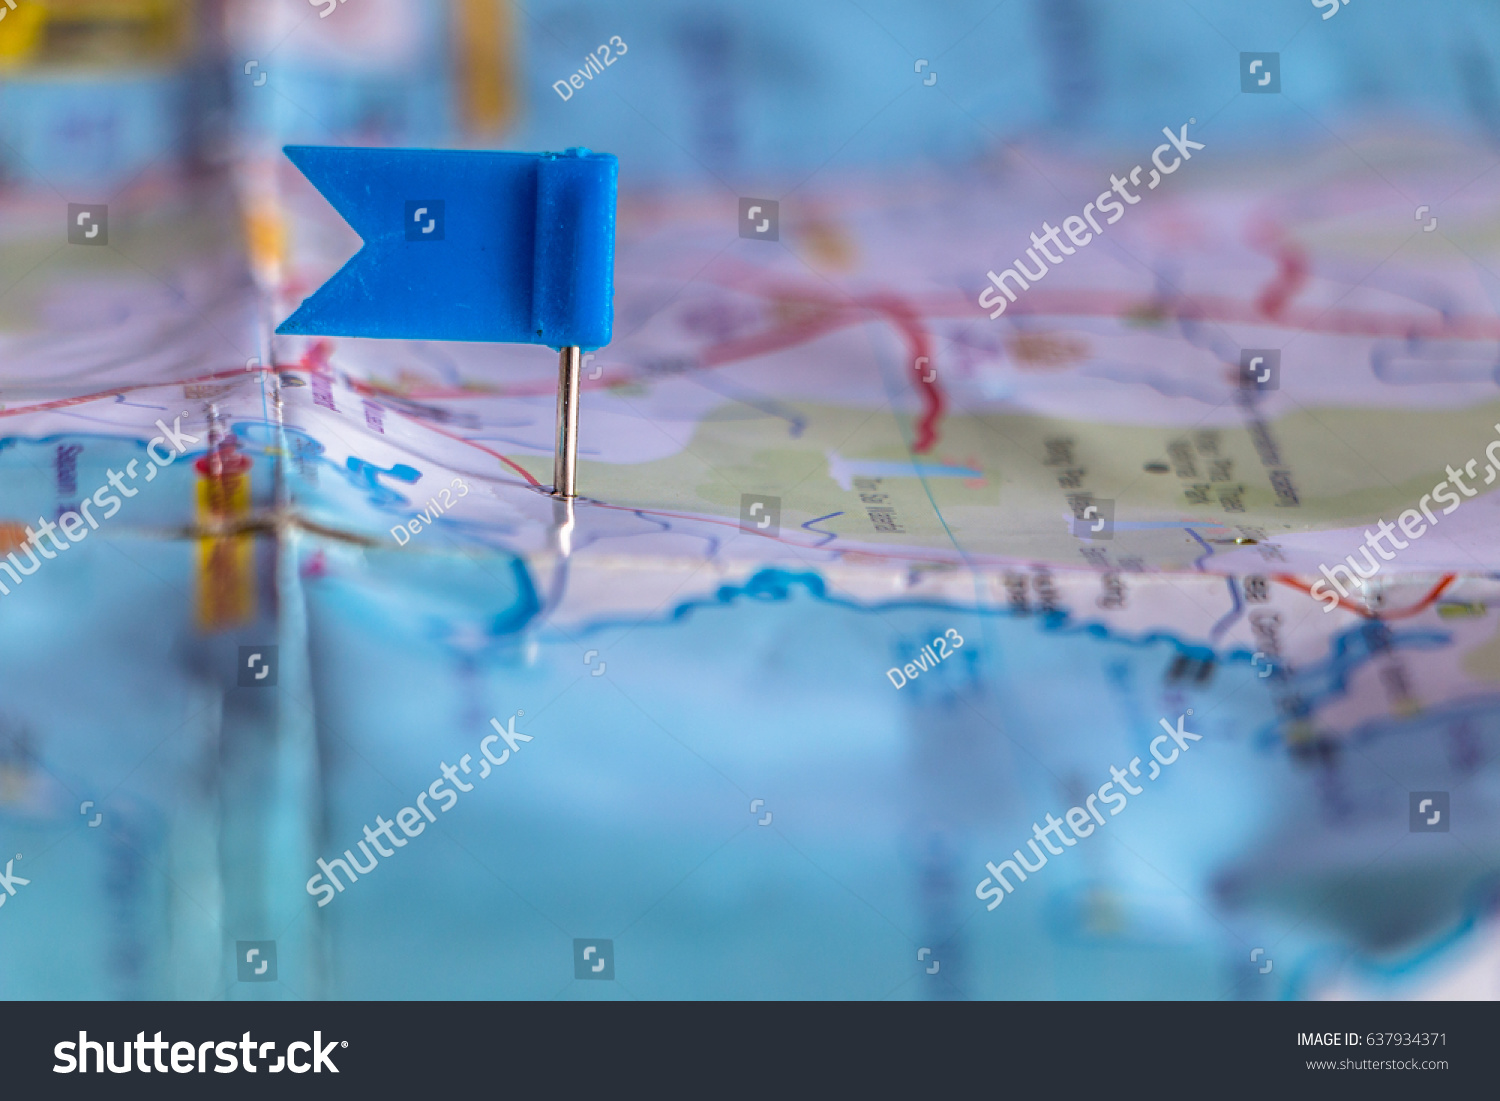 Travel destination pin points on a map with colorful thumbtacks and depth of field with select focus. #637934371